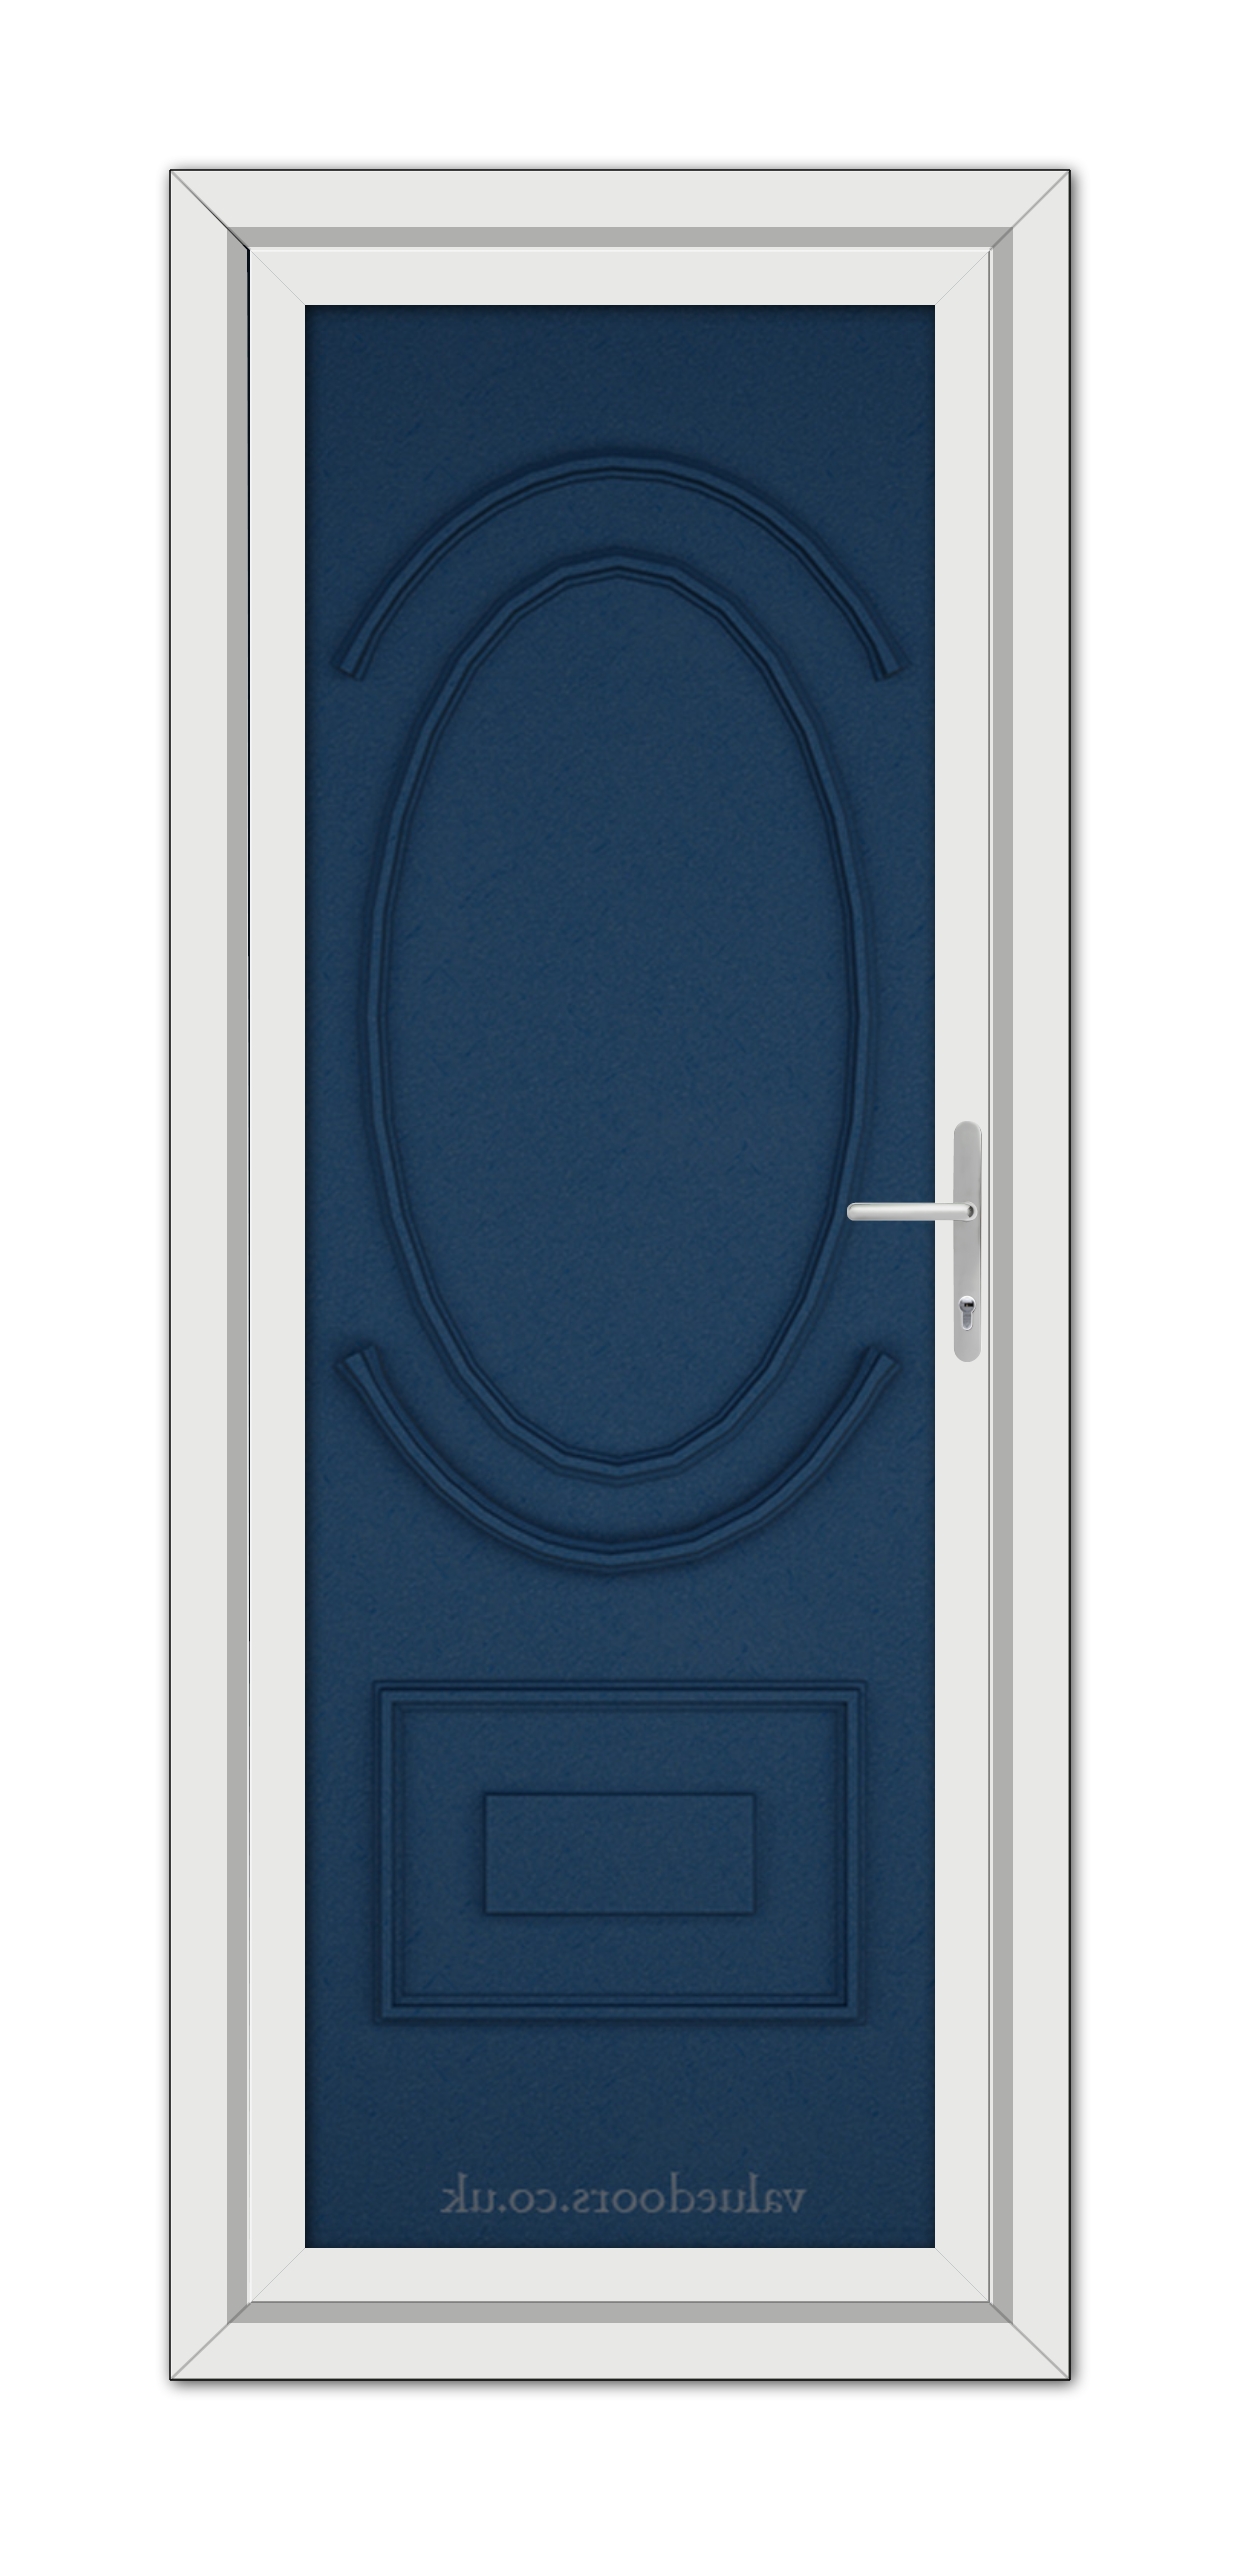 A vertical image of a Blue Richmond Solid uPVC Door with an oval glass panel and silver handle, set in a white frame.